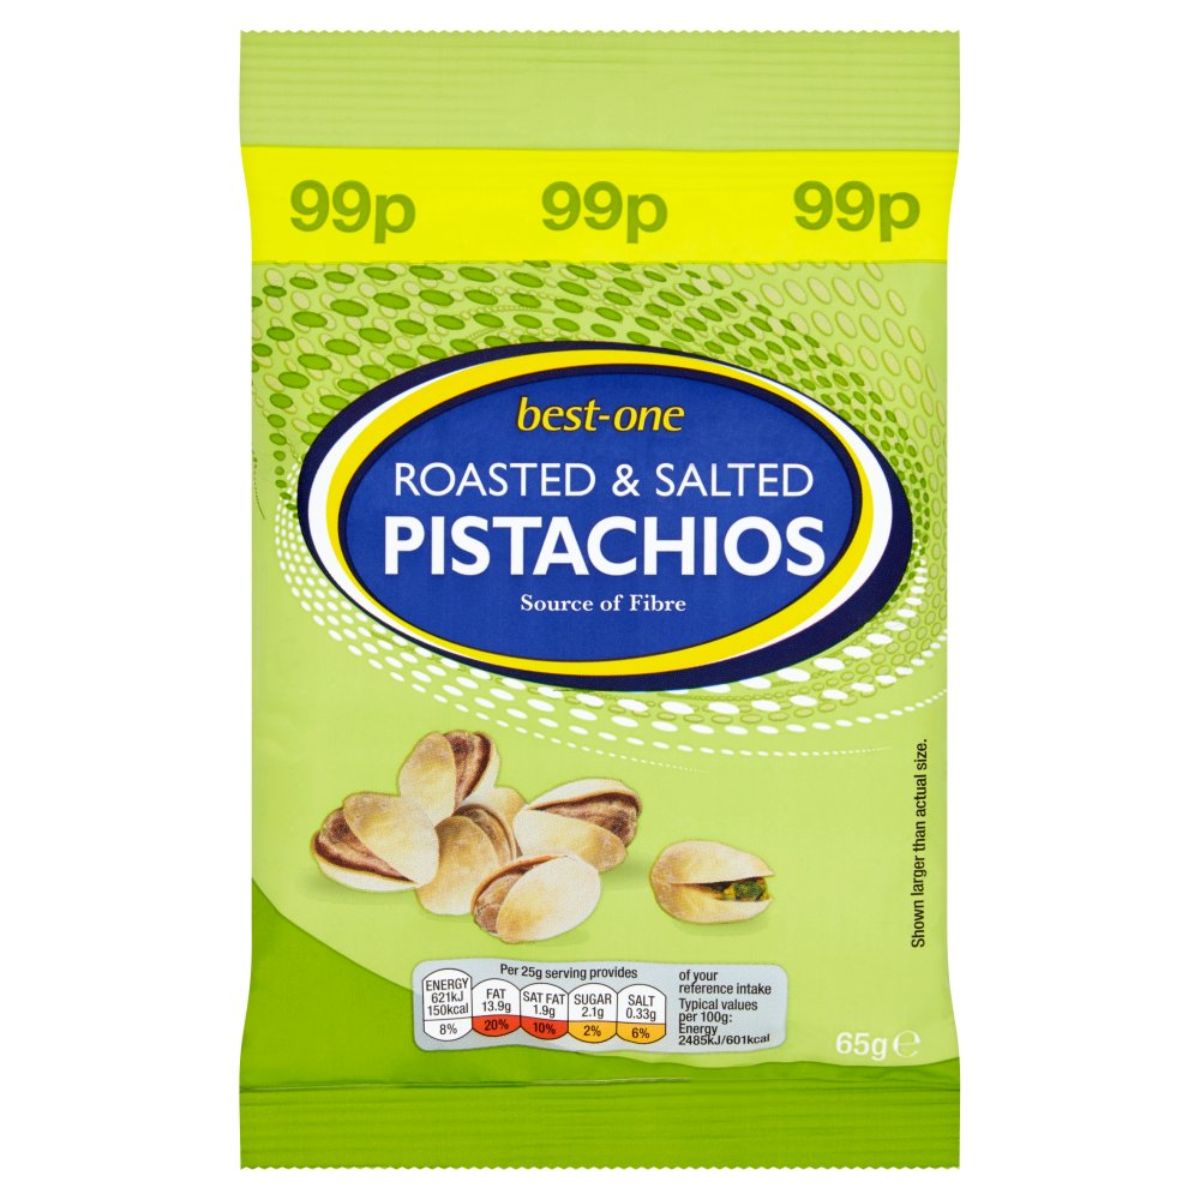 Best One - Roasted & Salted Pistachios - 65g are delicious.